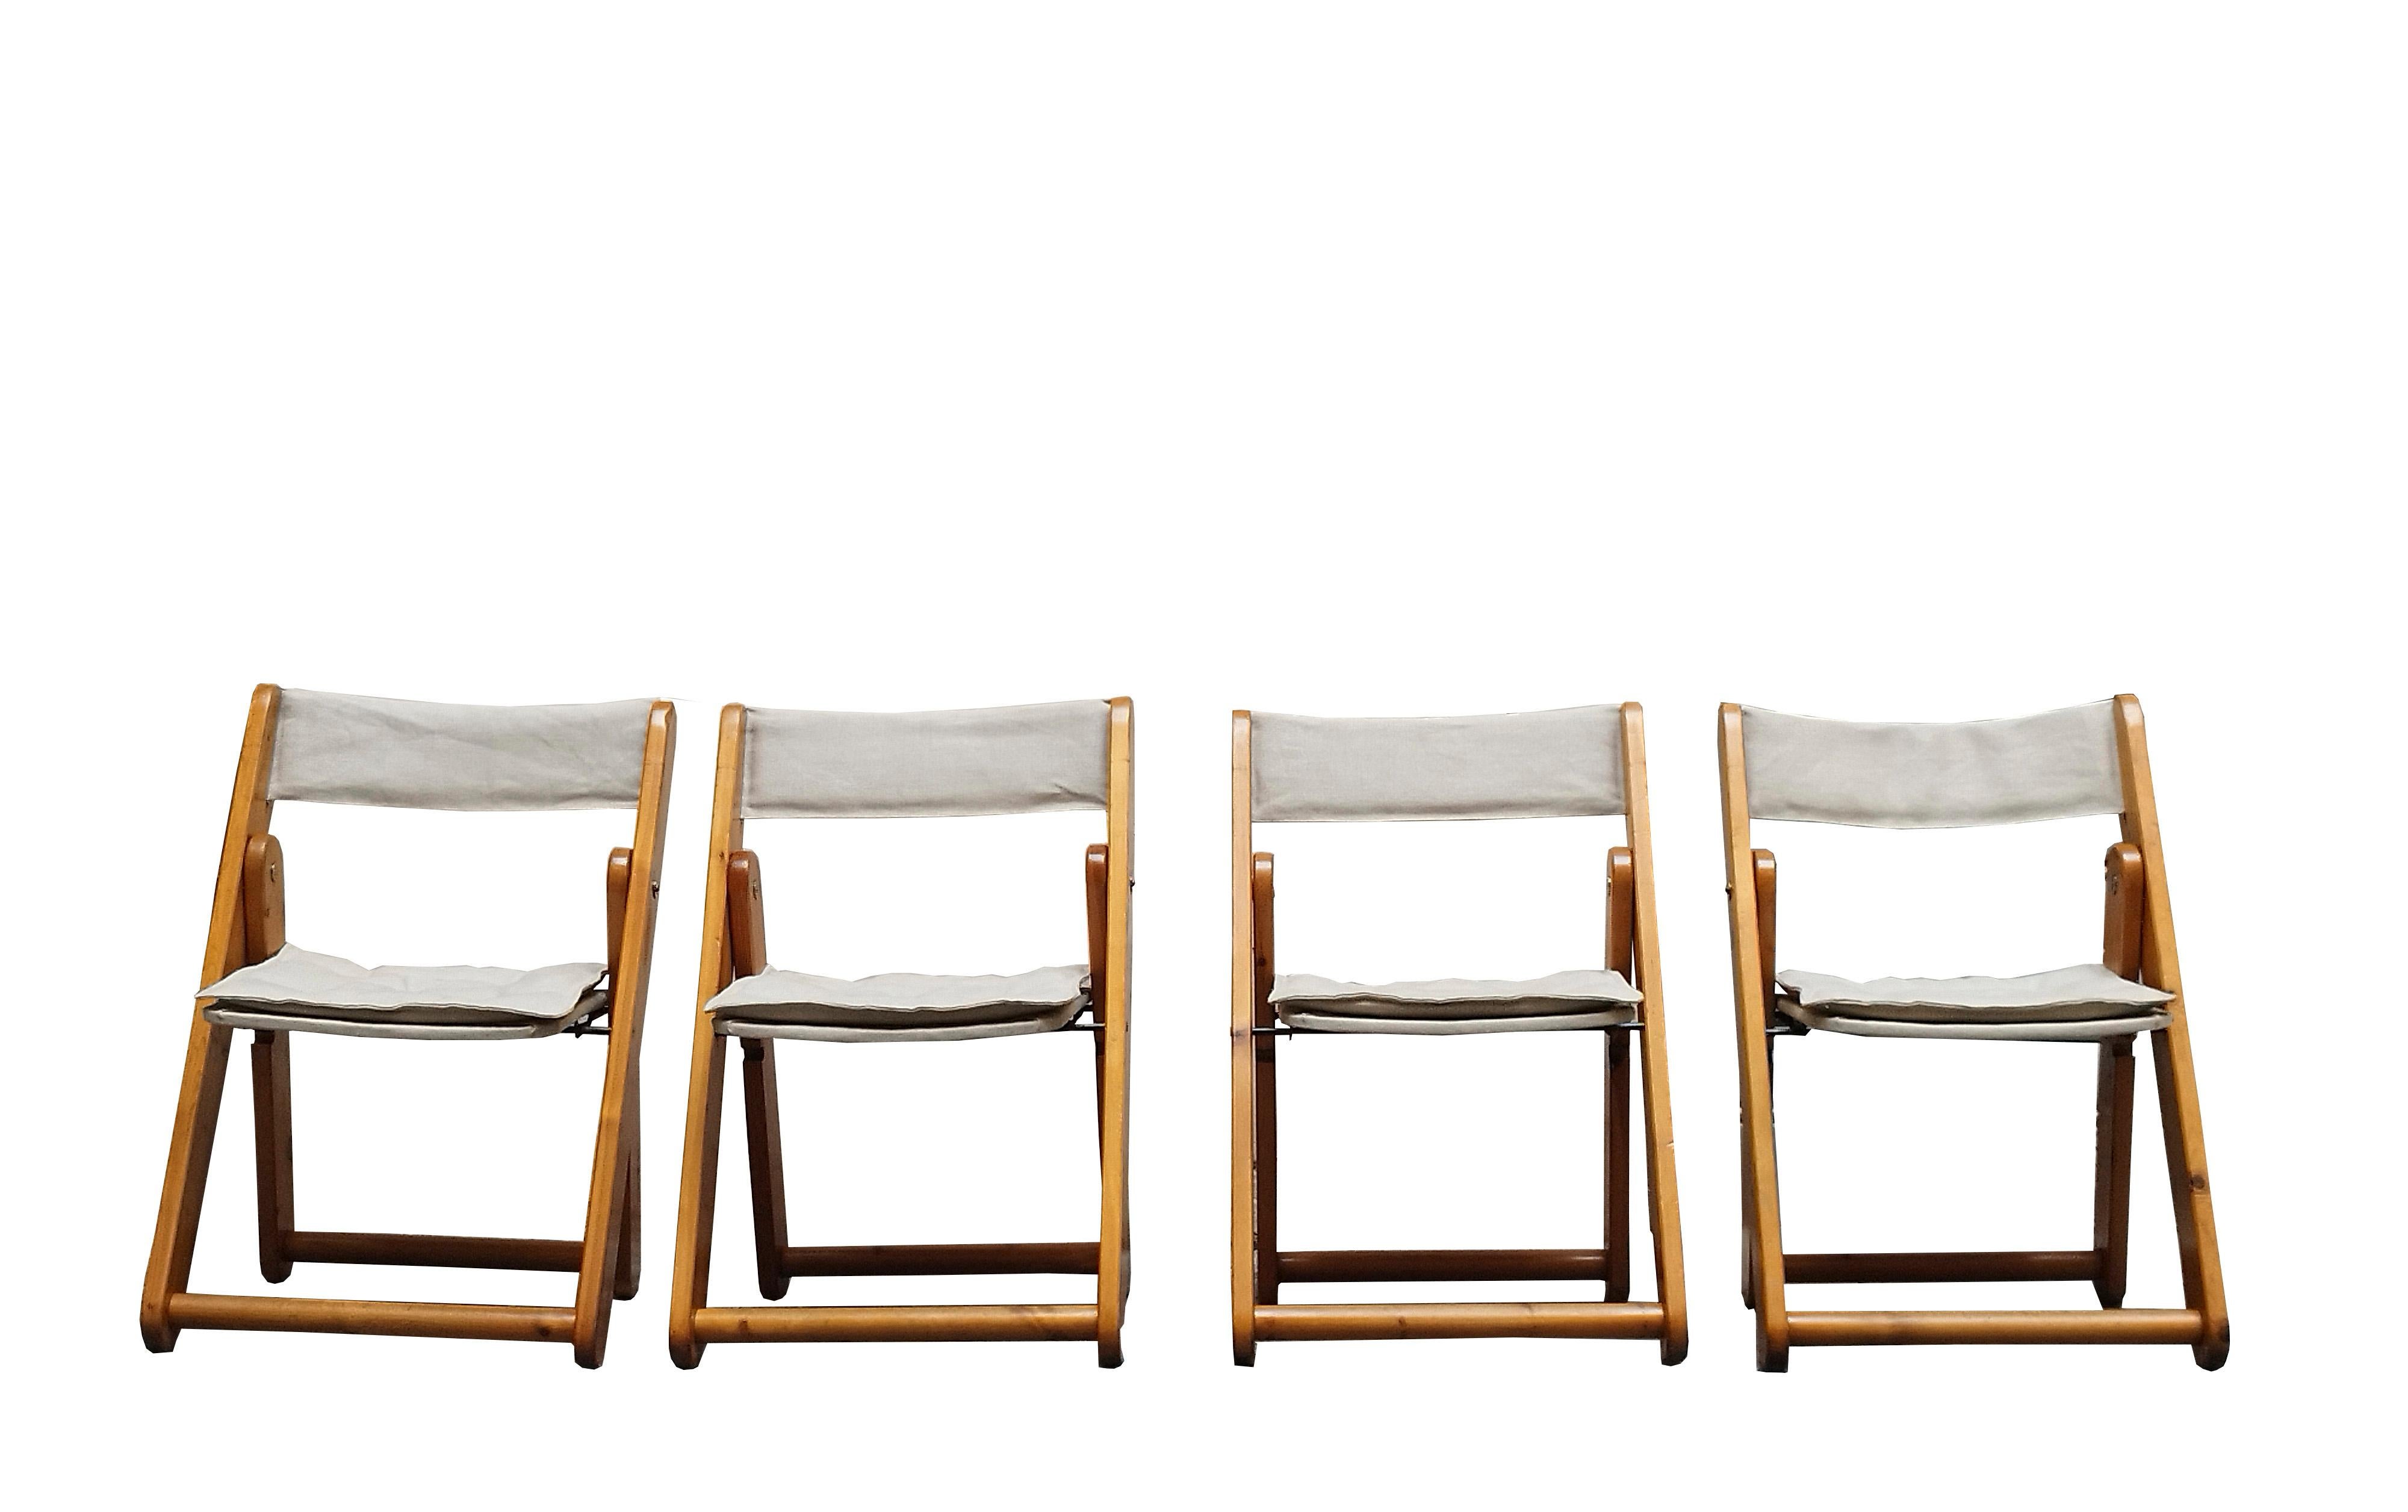 The folding chairs designed by Gillis Lundgren for Ikea come from Sweden in the 1970s. The Kon Tiki model belongs to the garden furniture series introduced by IKEA in 1974. Their timeless design makes them a perfect match for the living room, dining